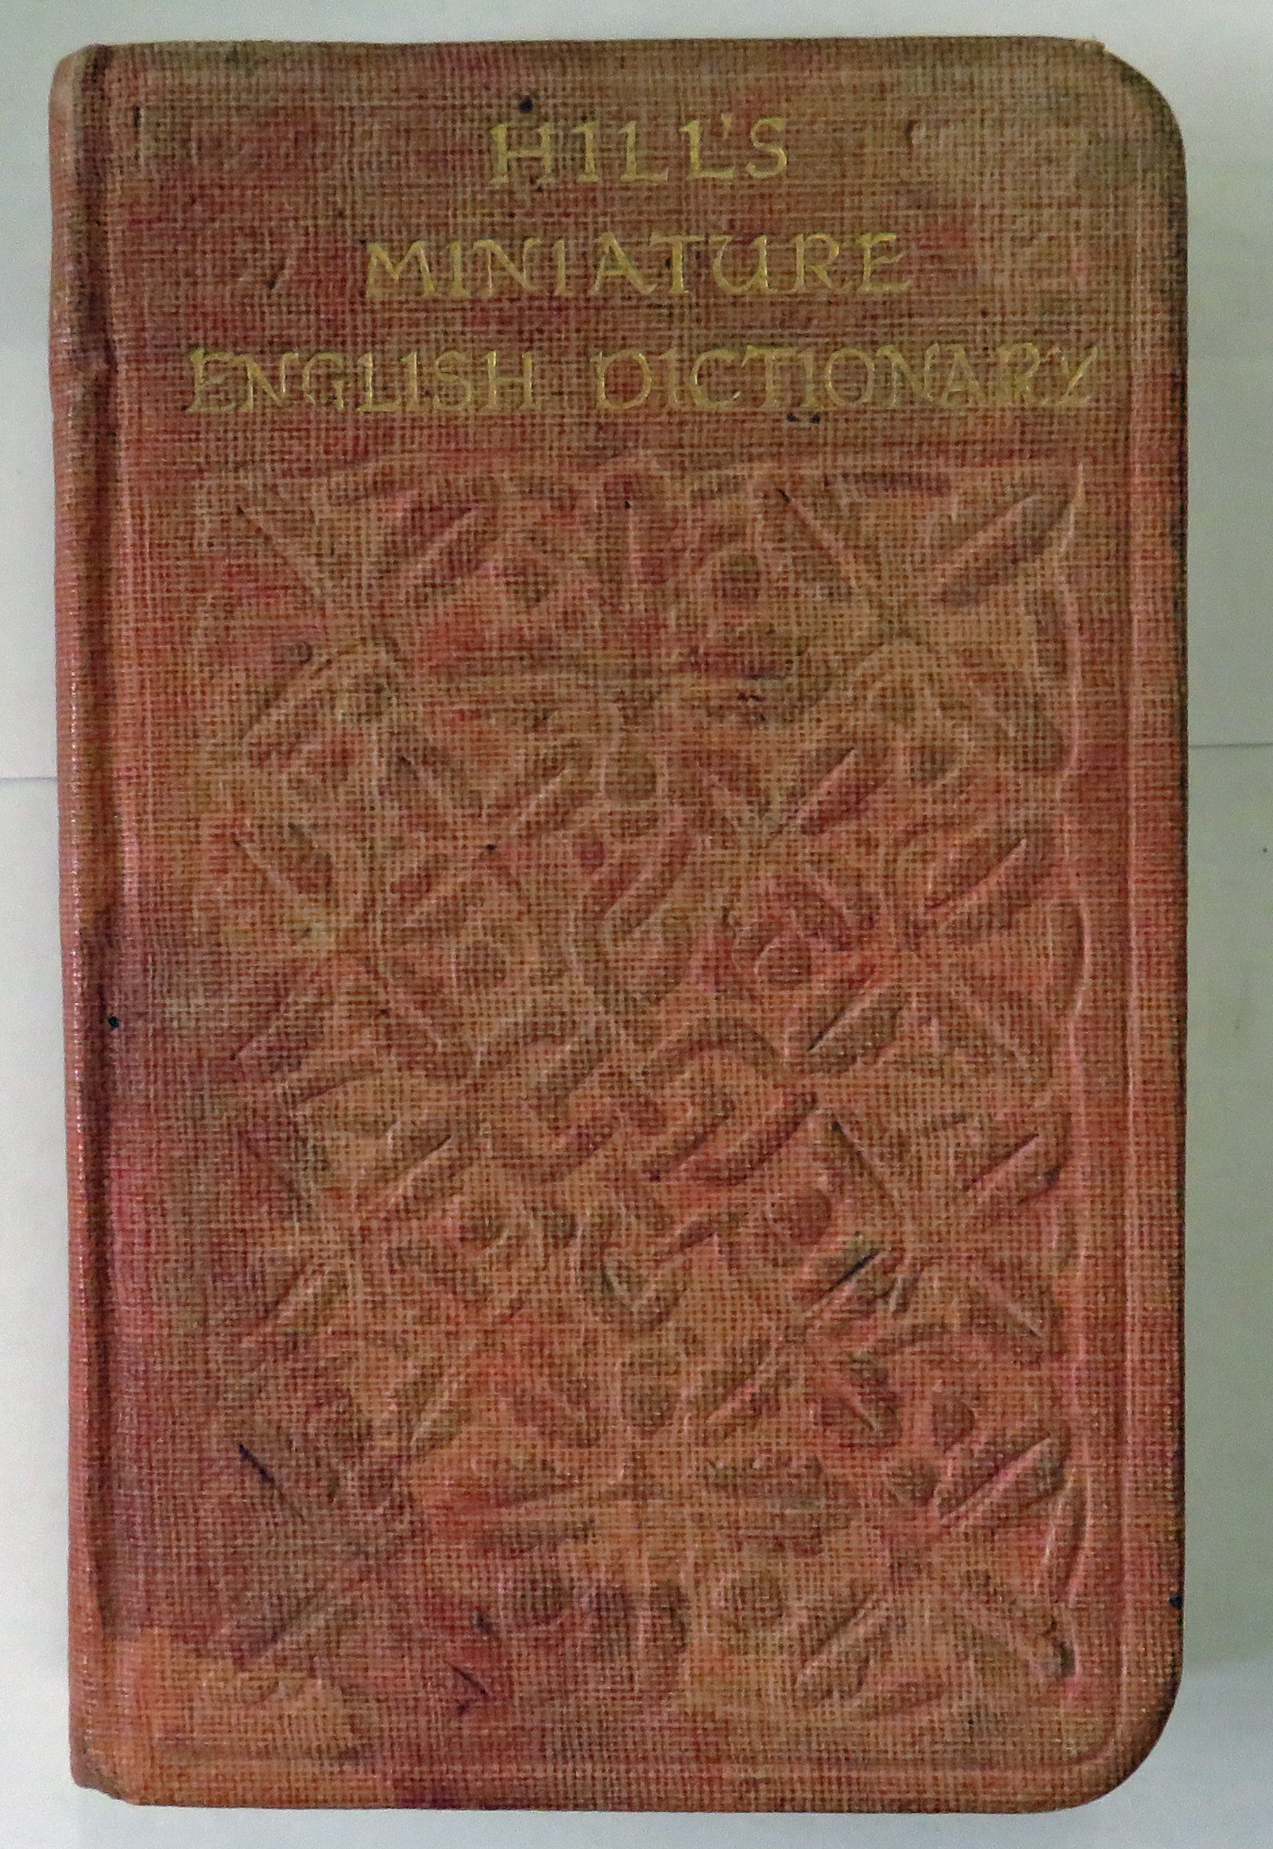 Hill's Miniature Pronouncing Dictionary Of The English Language 